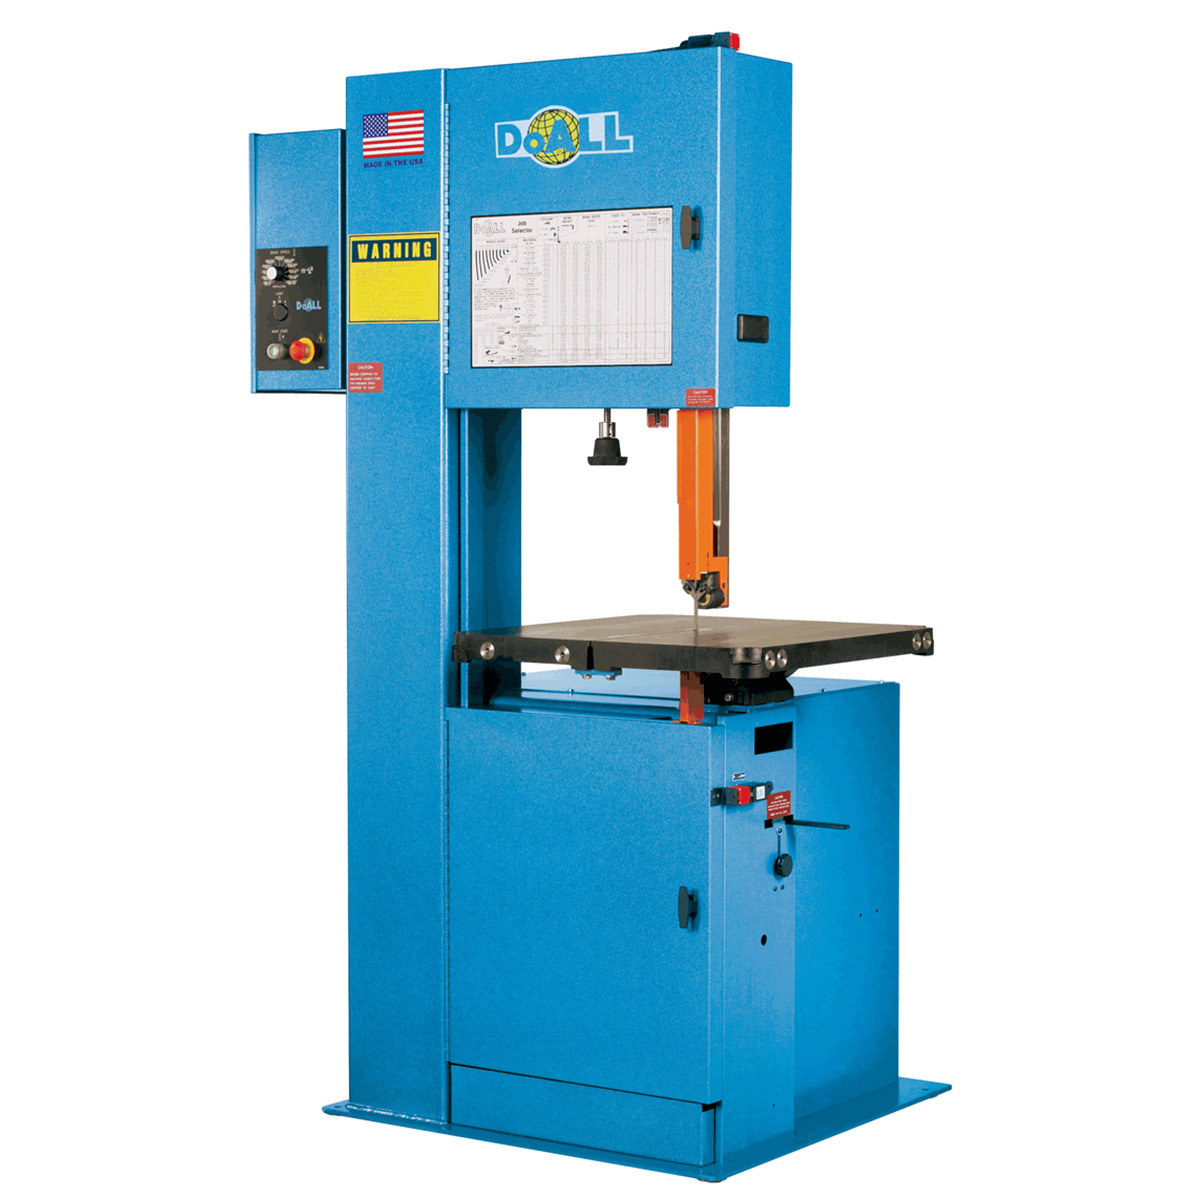 20" New DoAll Vertical Band Saw Model 2013-V2 for sale at Worldwide